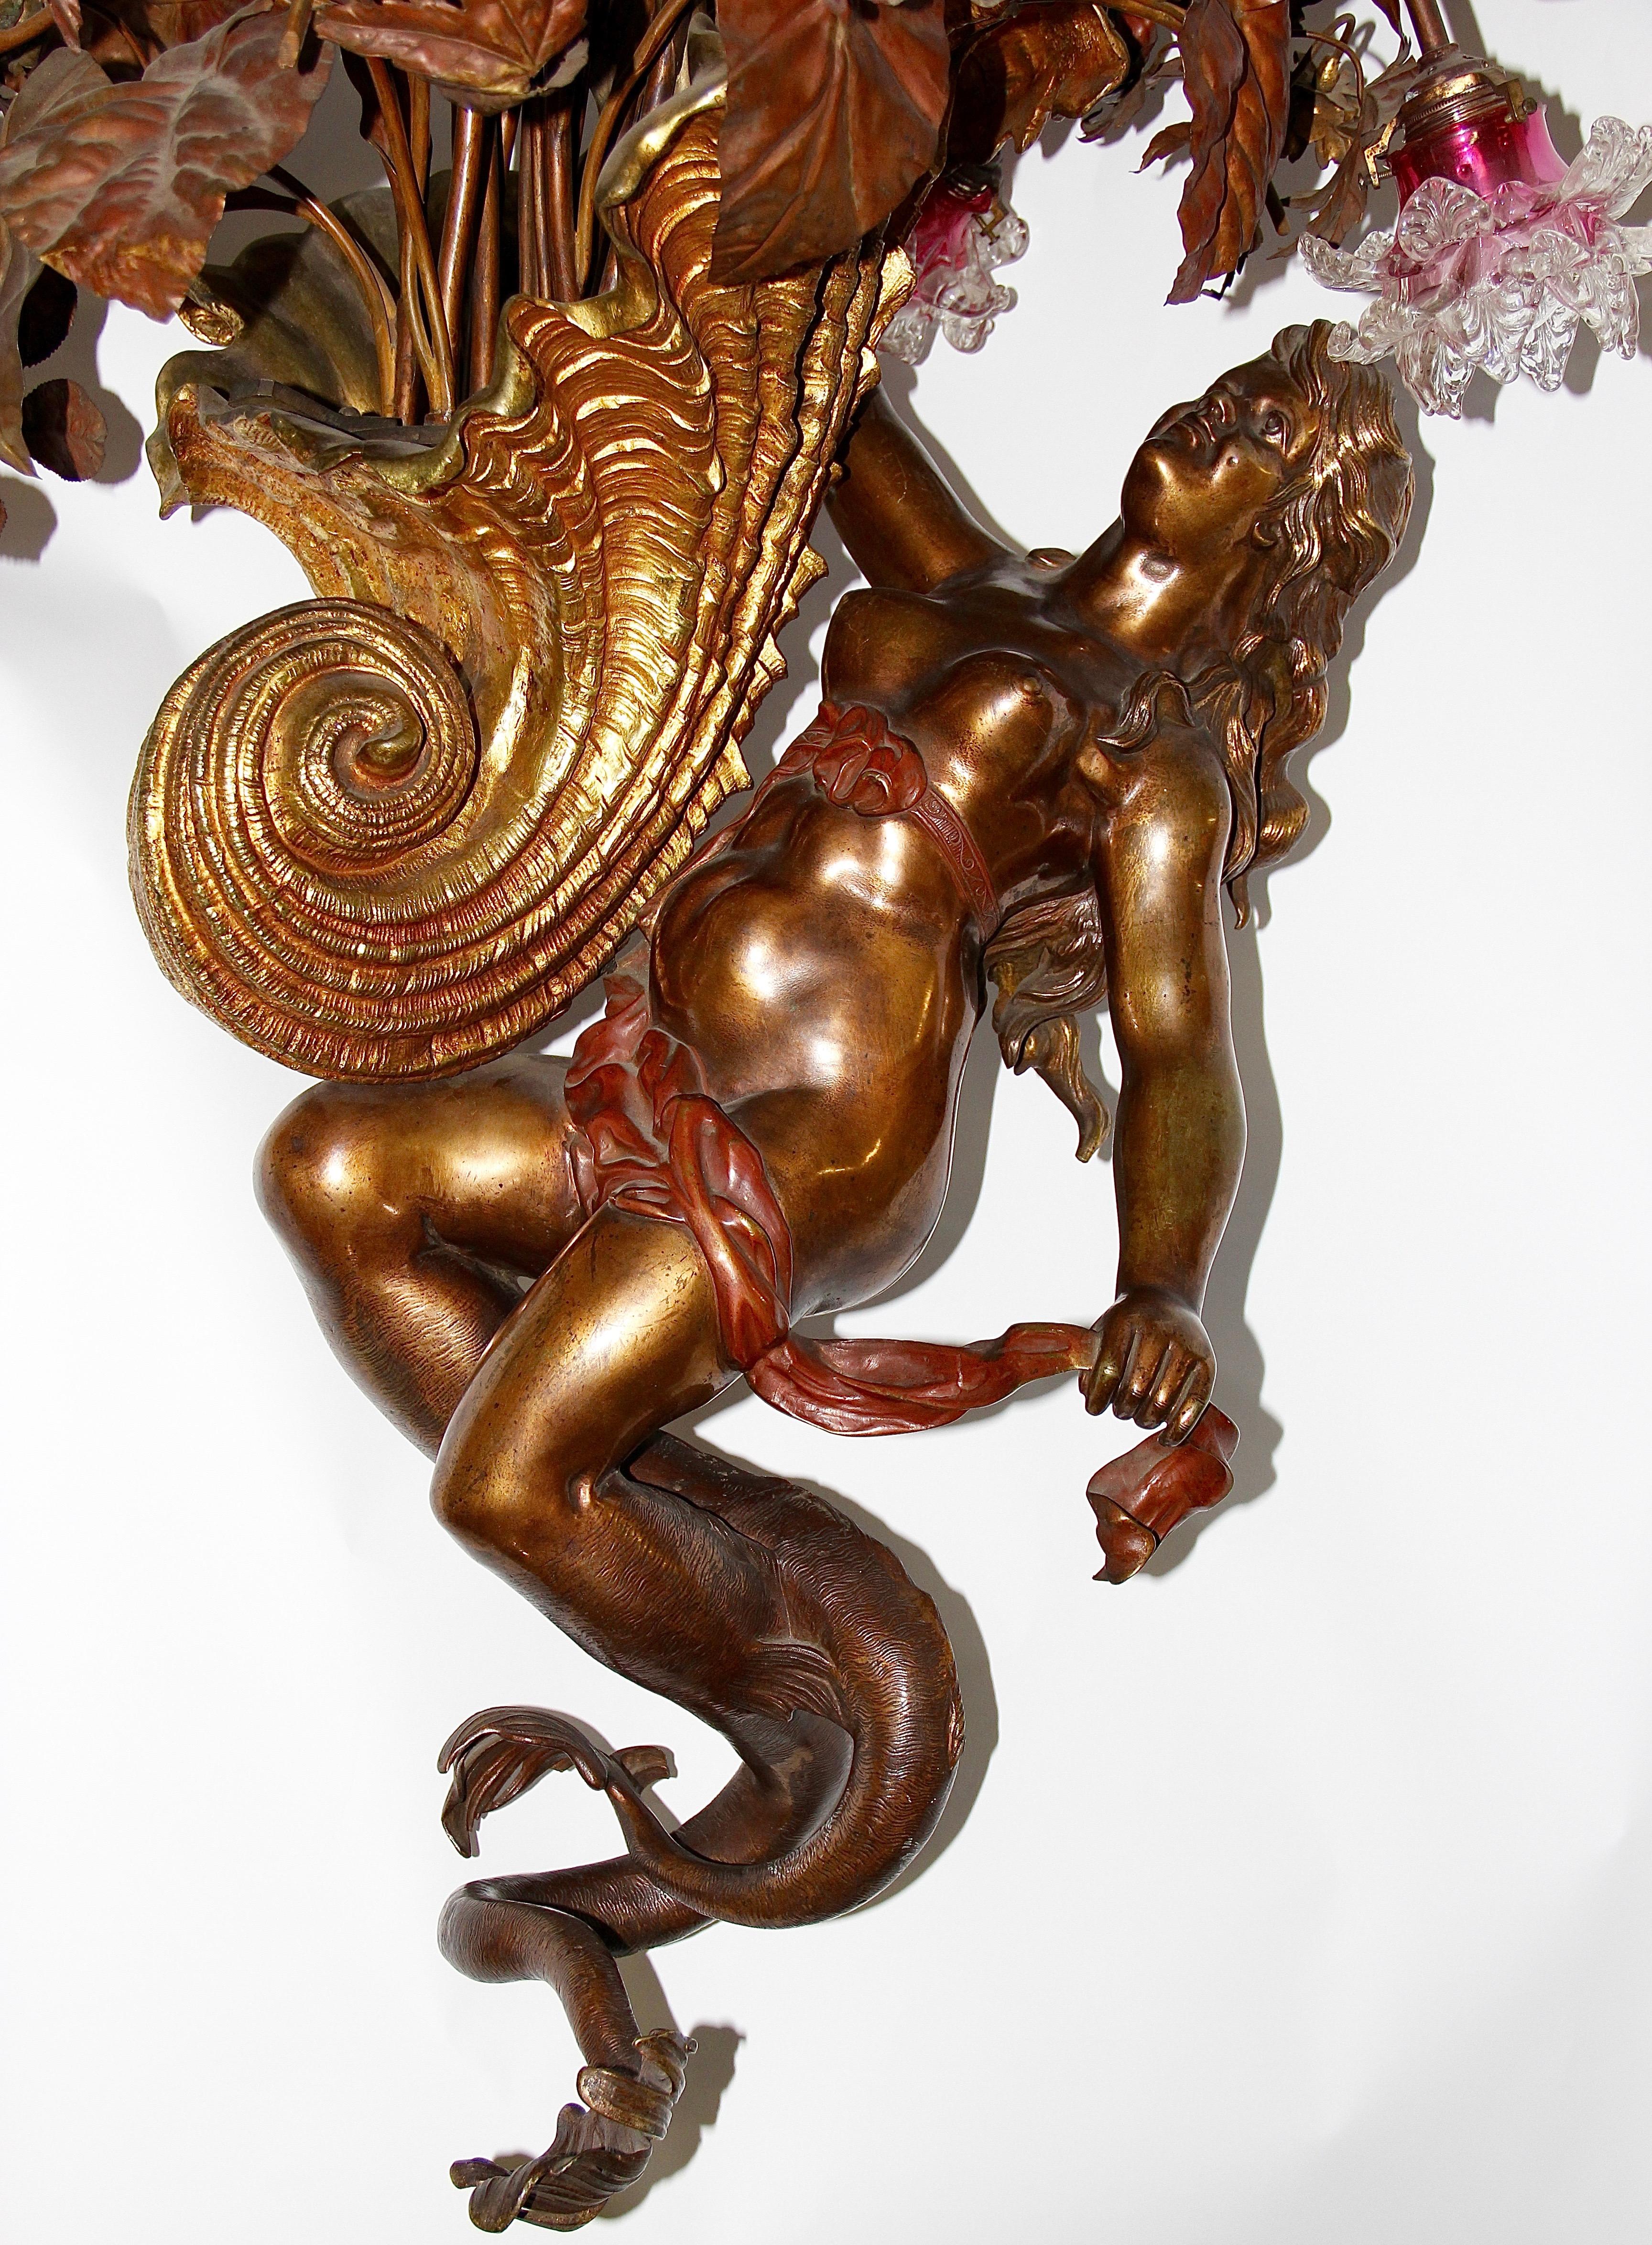 Extremely decorative, heavy and high quality chandelier.
Date of origin estimated circa 1880-1920.

This chandelier impresses with its uniqueness.

Large bronze nude figure as a mythical creature (presumably a kind of mermaid) with one hand